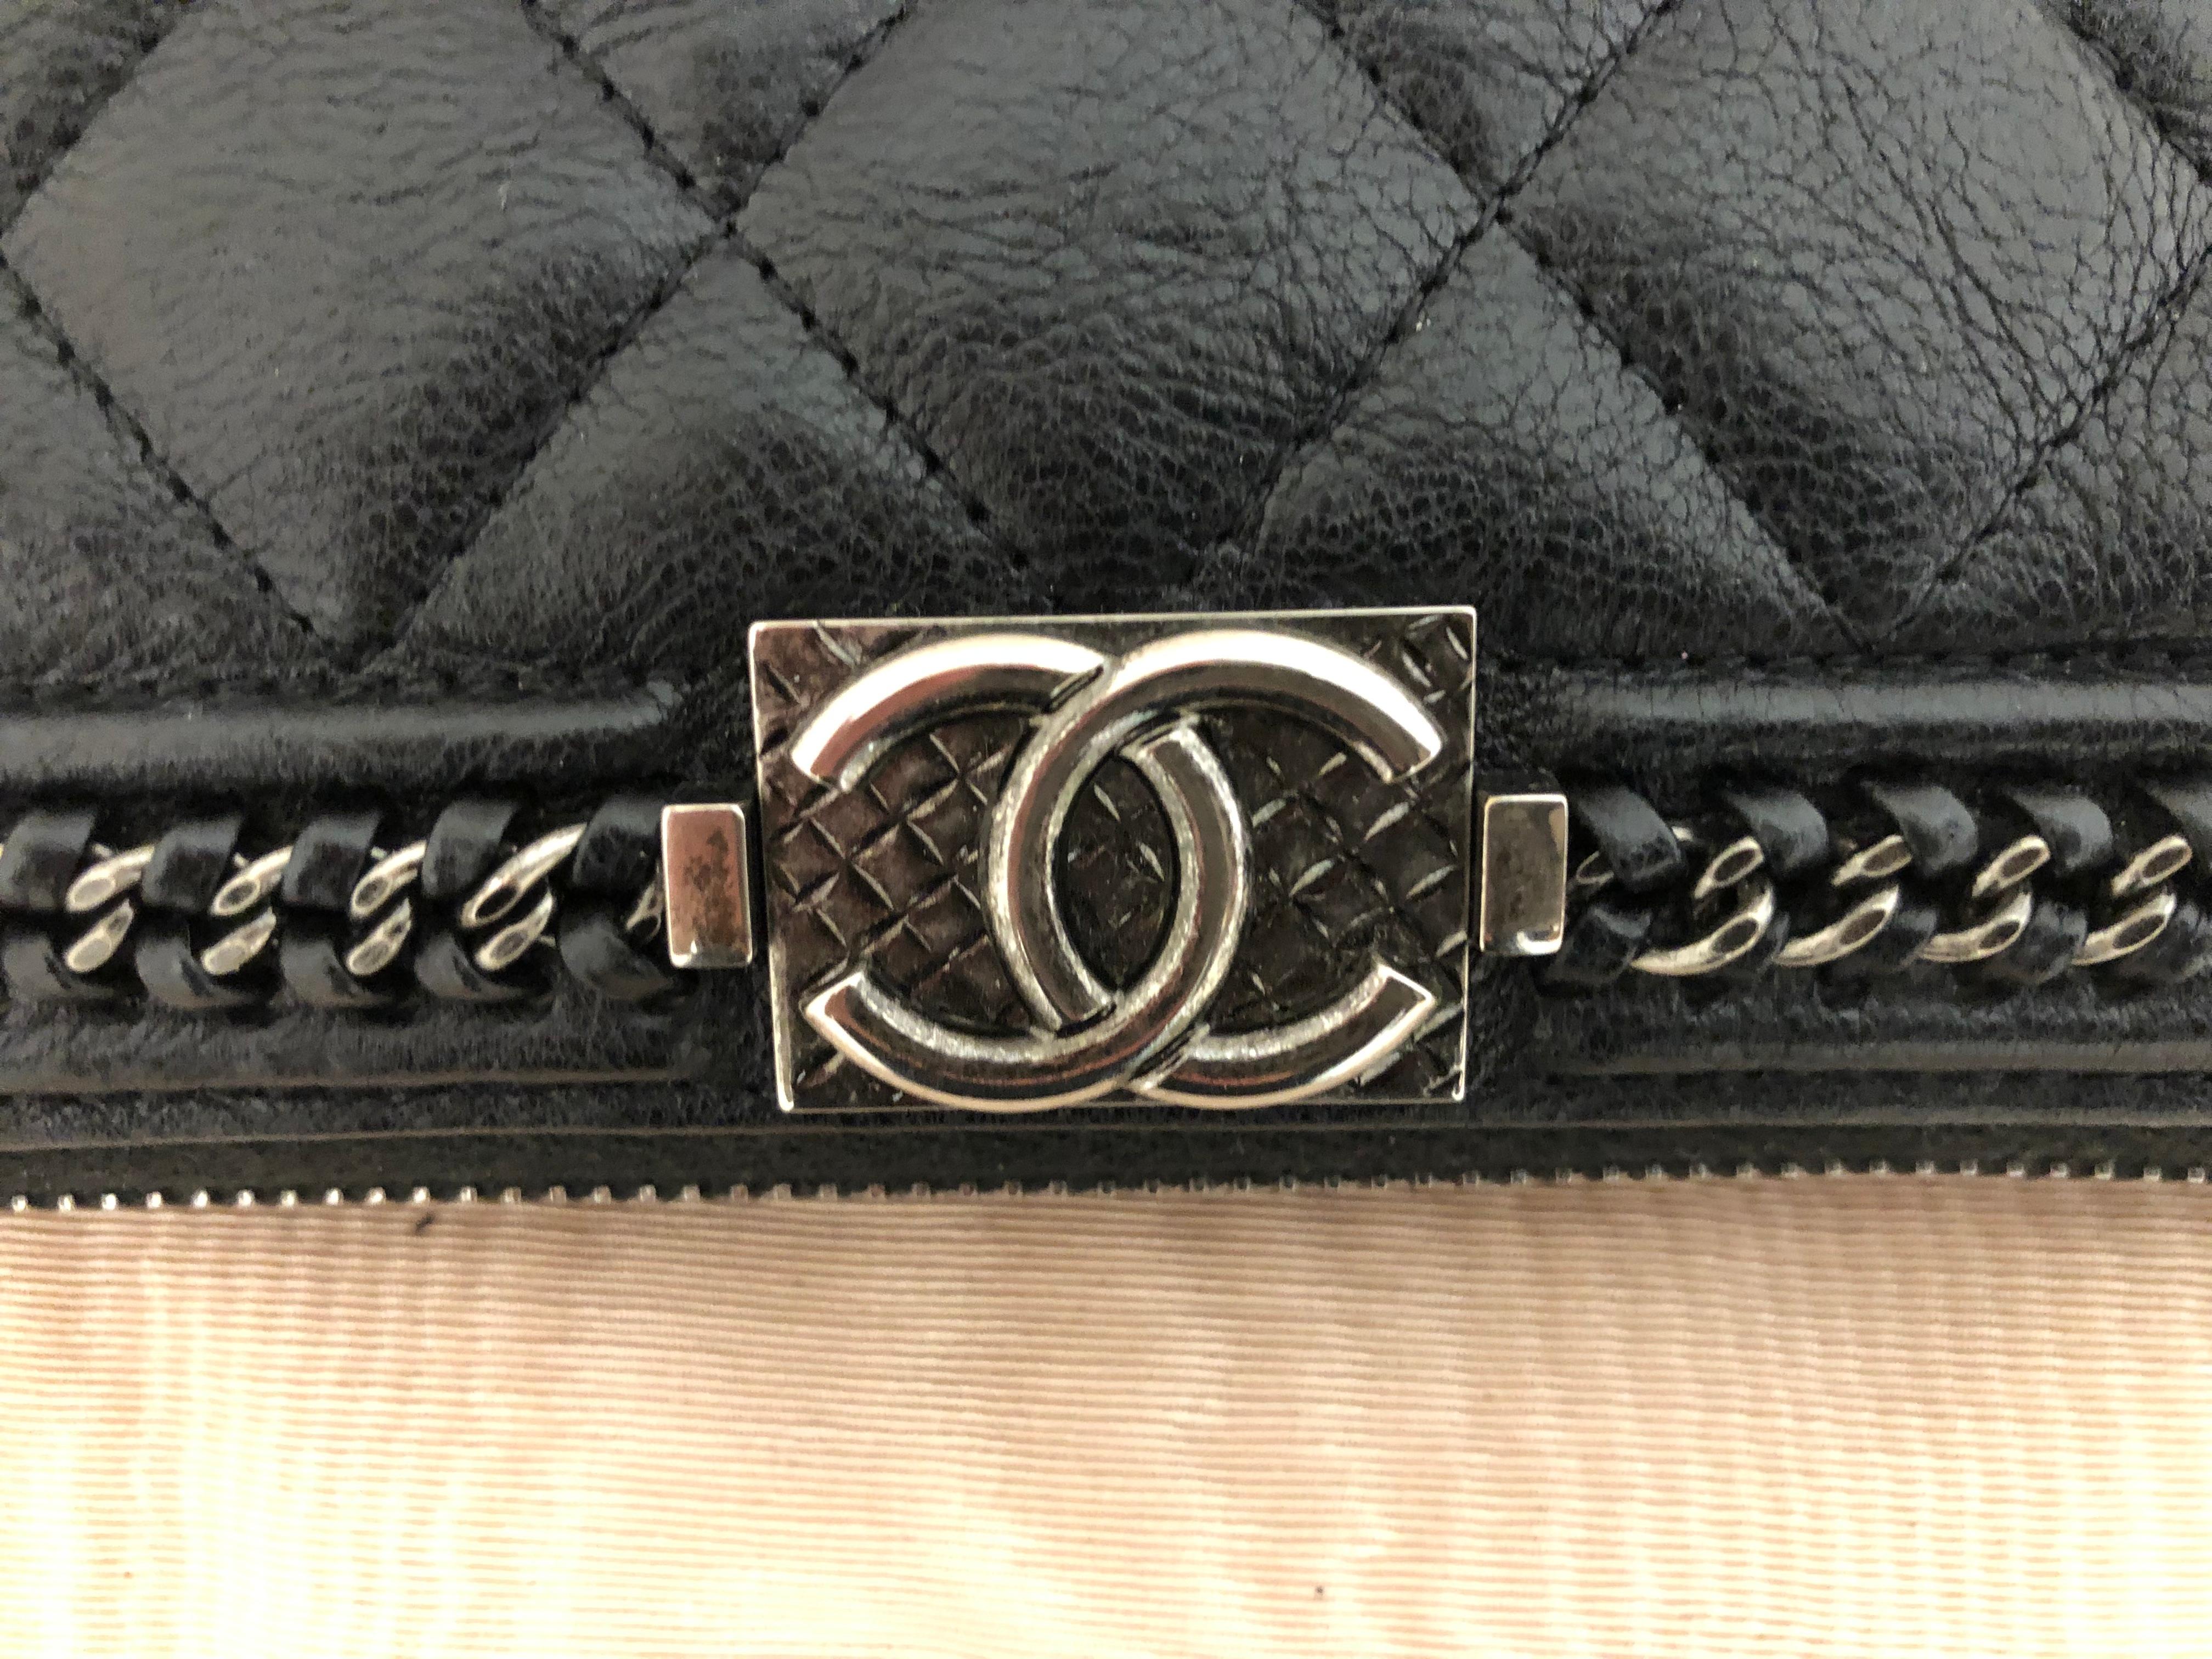 It is a zip around limited edition 2016-17 long wallet/clutch in as new condition, made in France. The limited edition relates to the chain trim embellishment. The pattern caviar leather is distressed and there is a CC, I believe ruthenium quilted